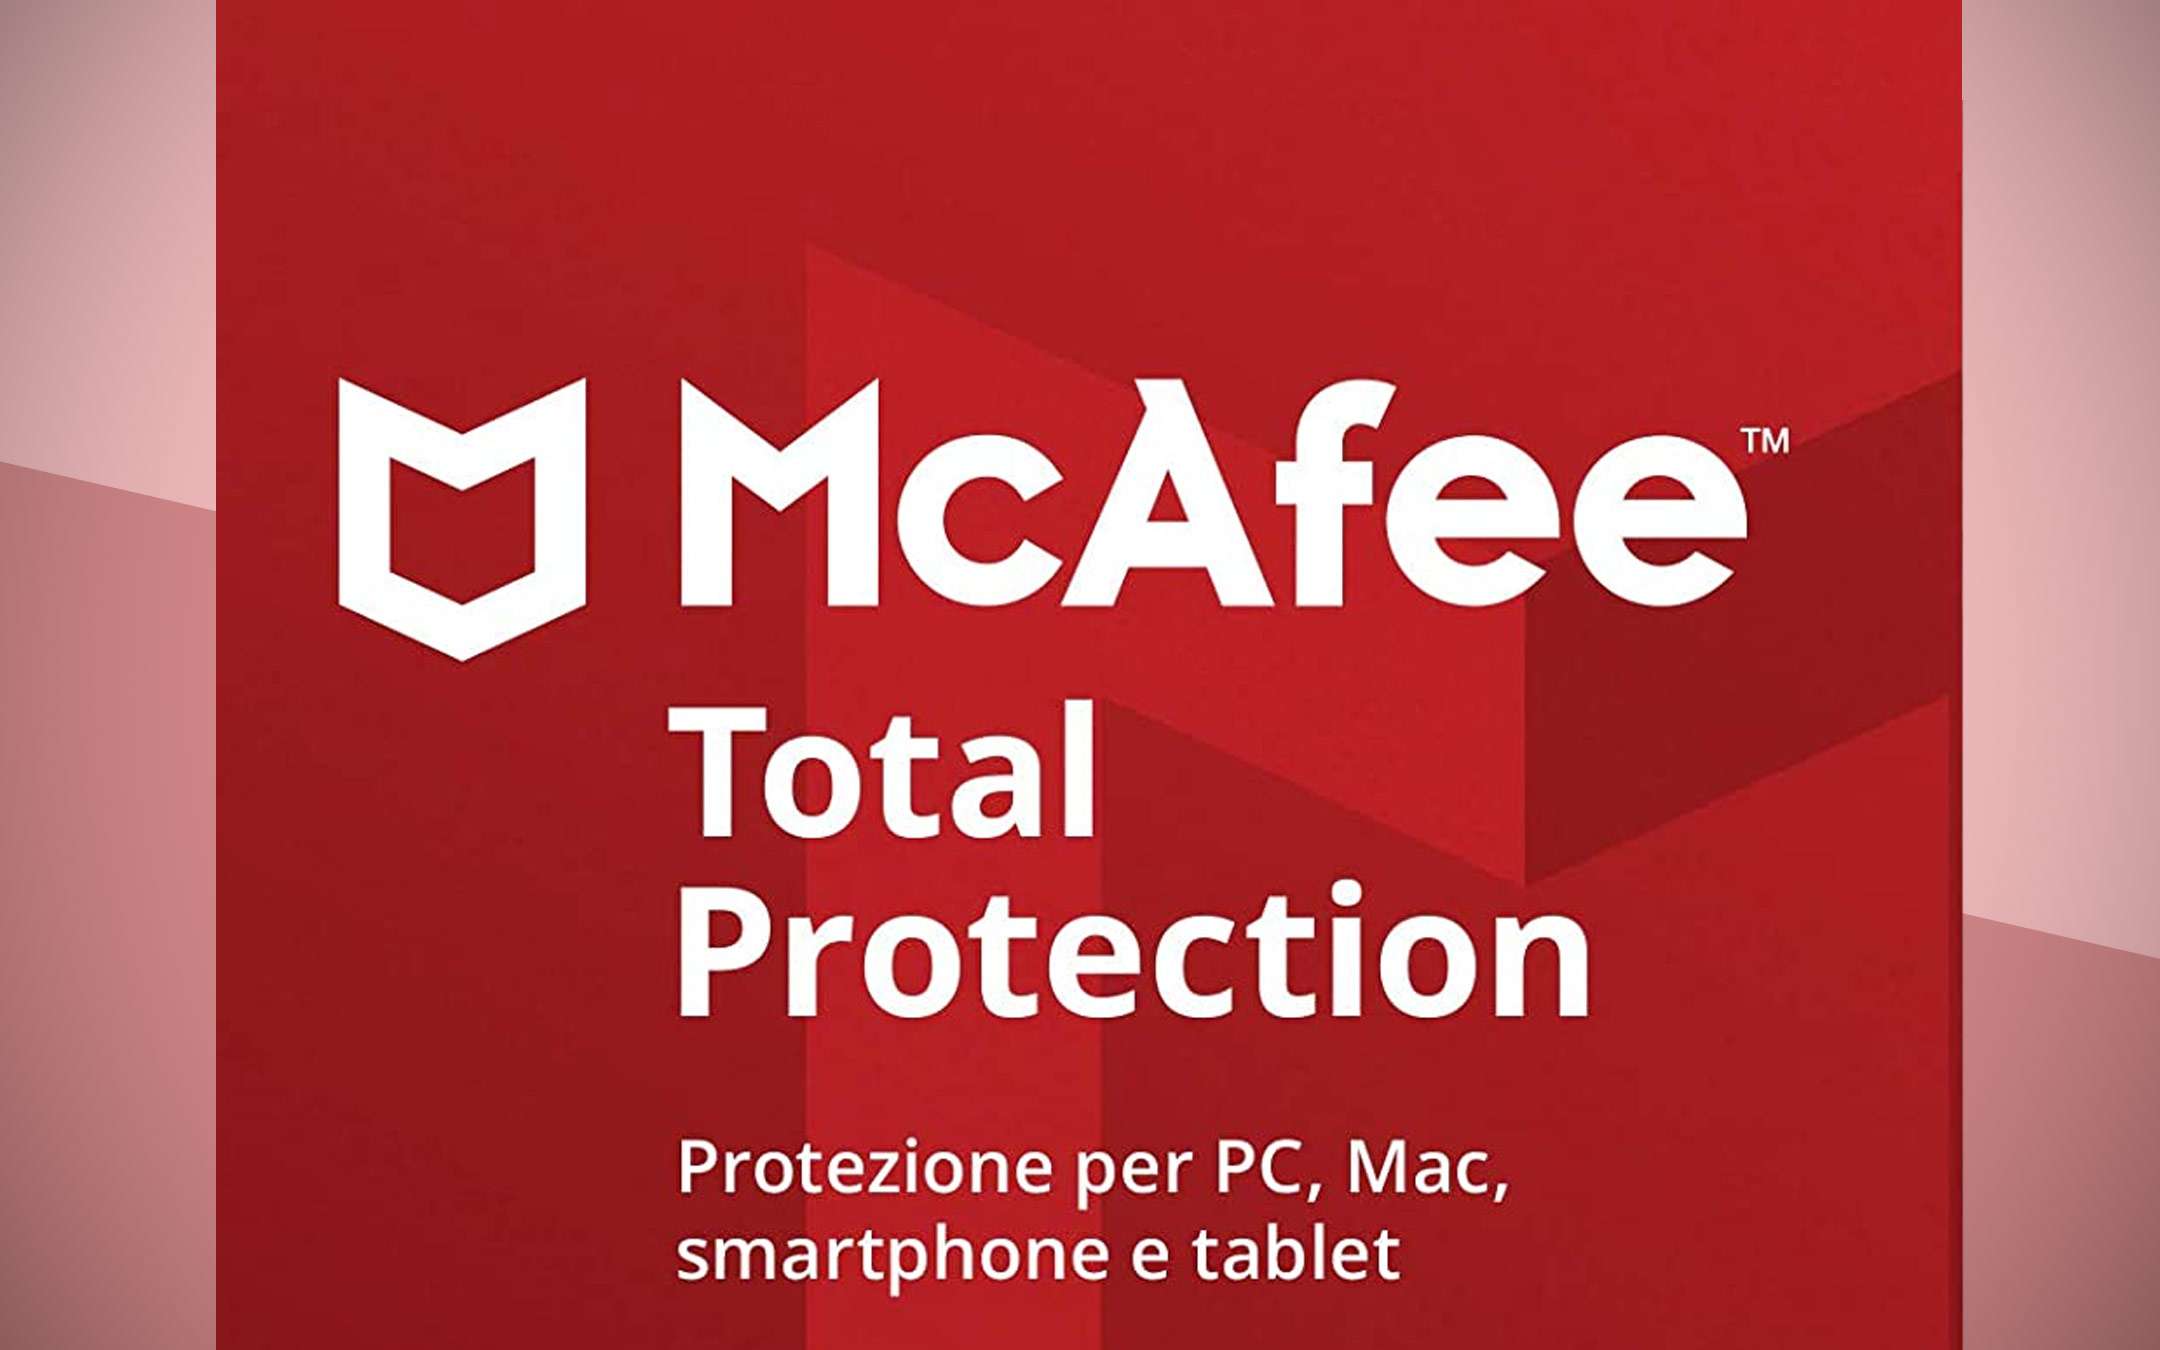 McAfee's security on offer from 10.99 euros